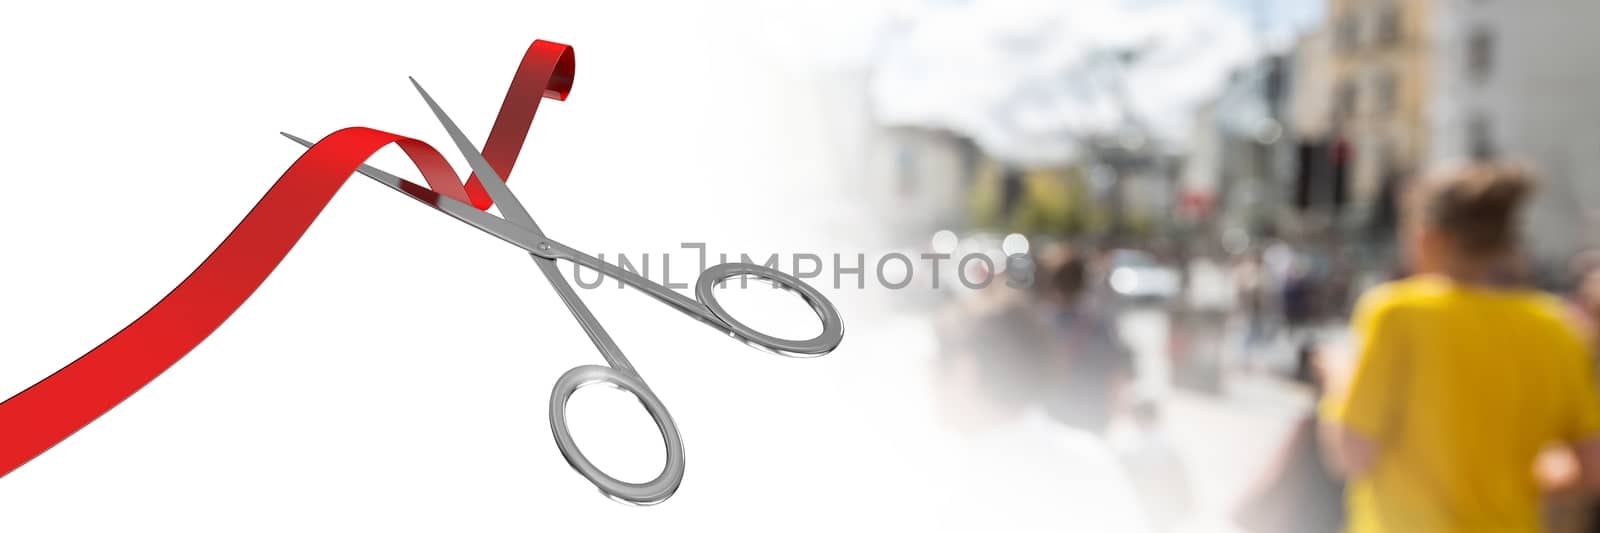 Digital composite of Scissors cutting ribbon with people on street